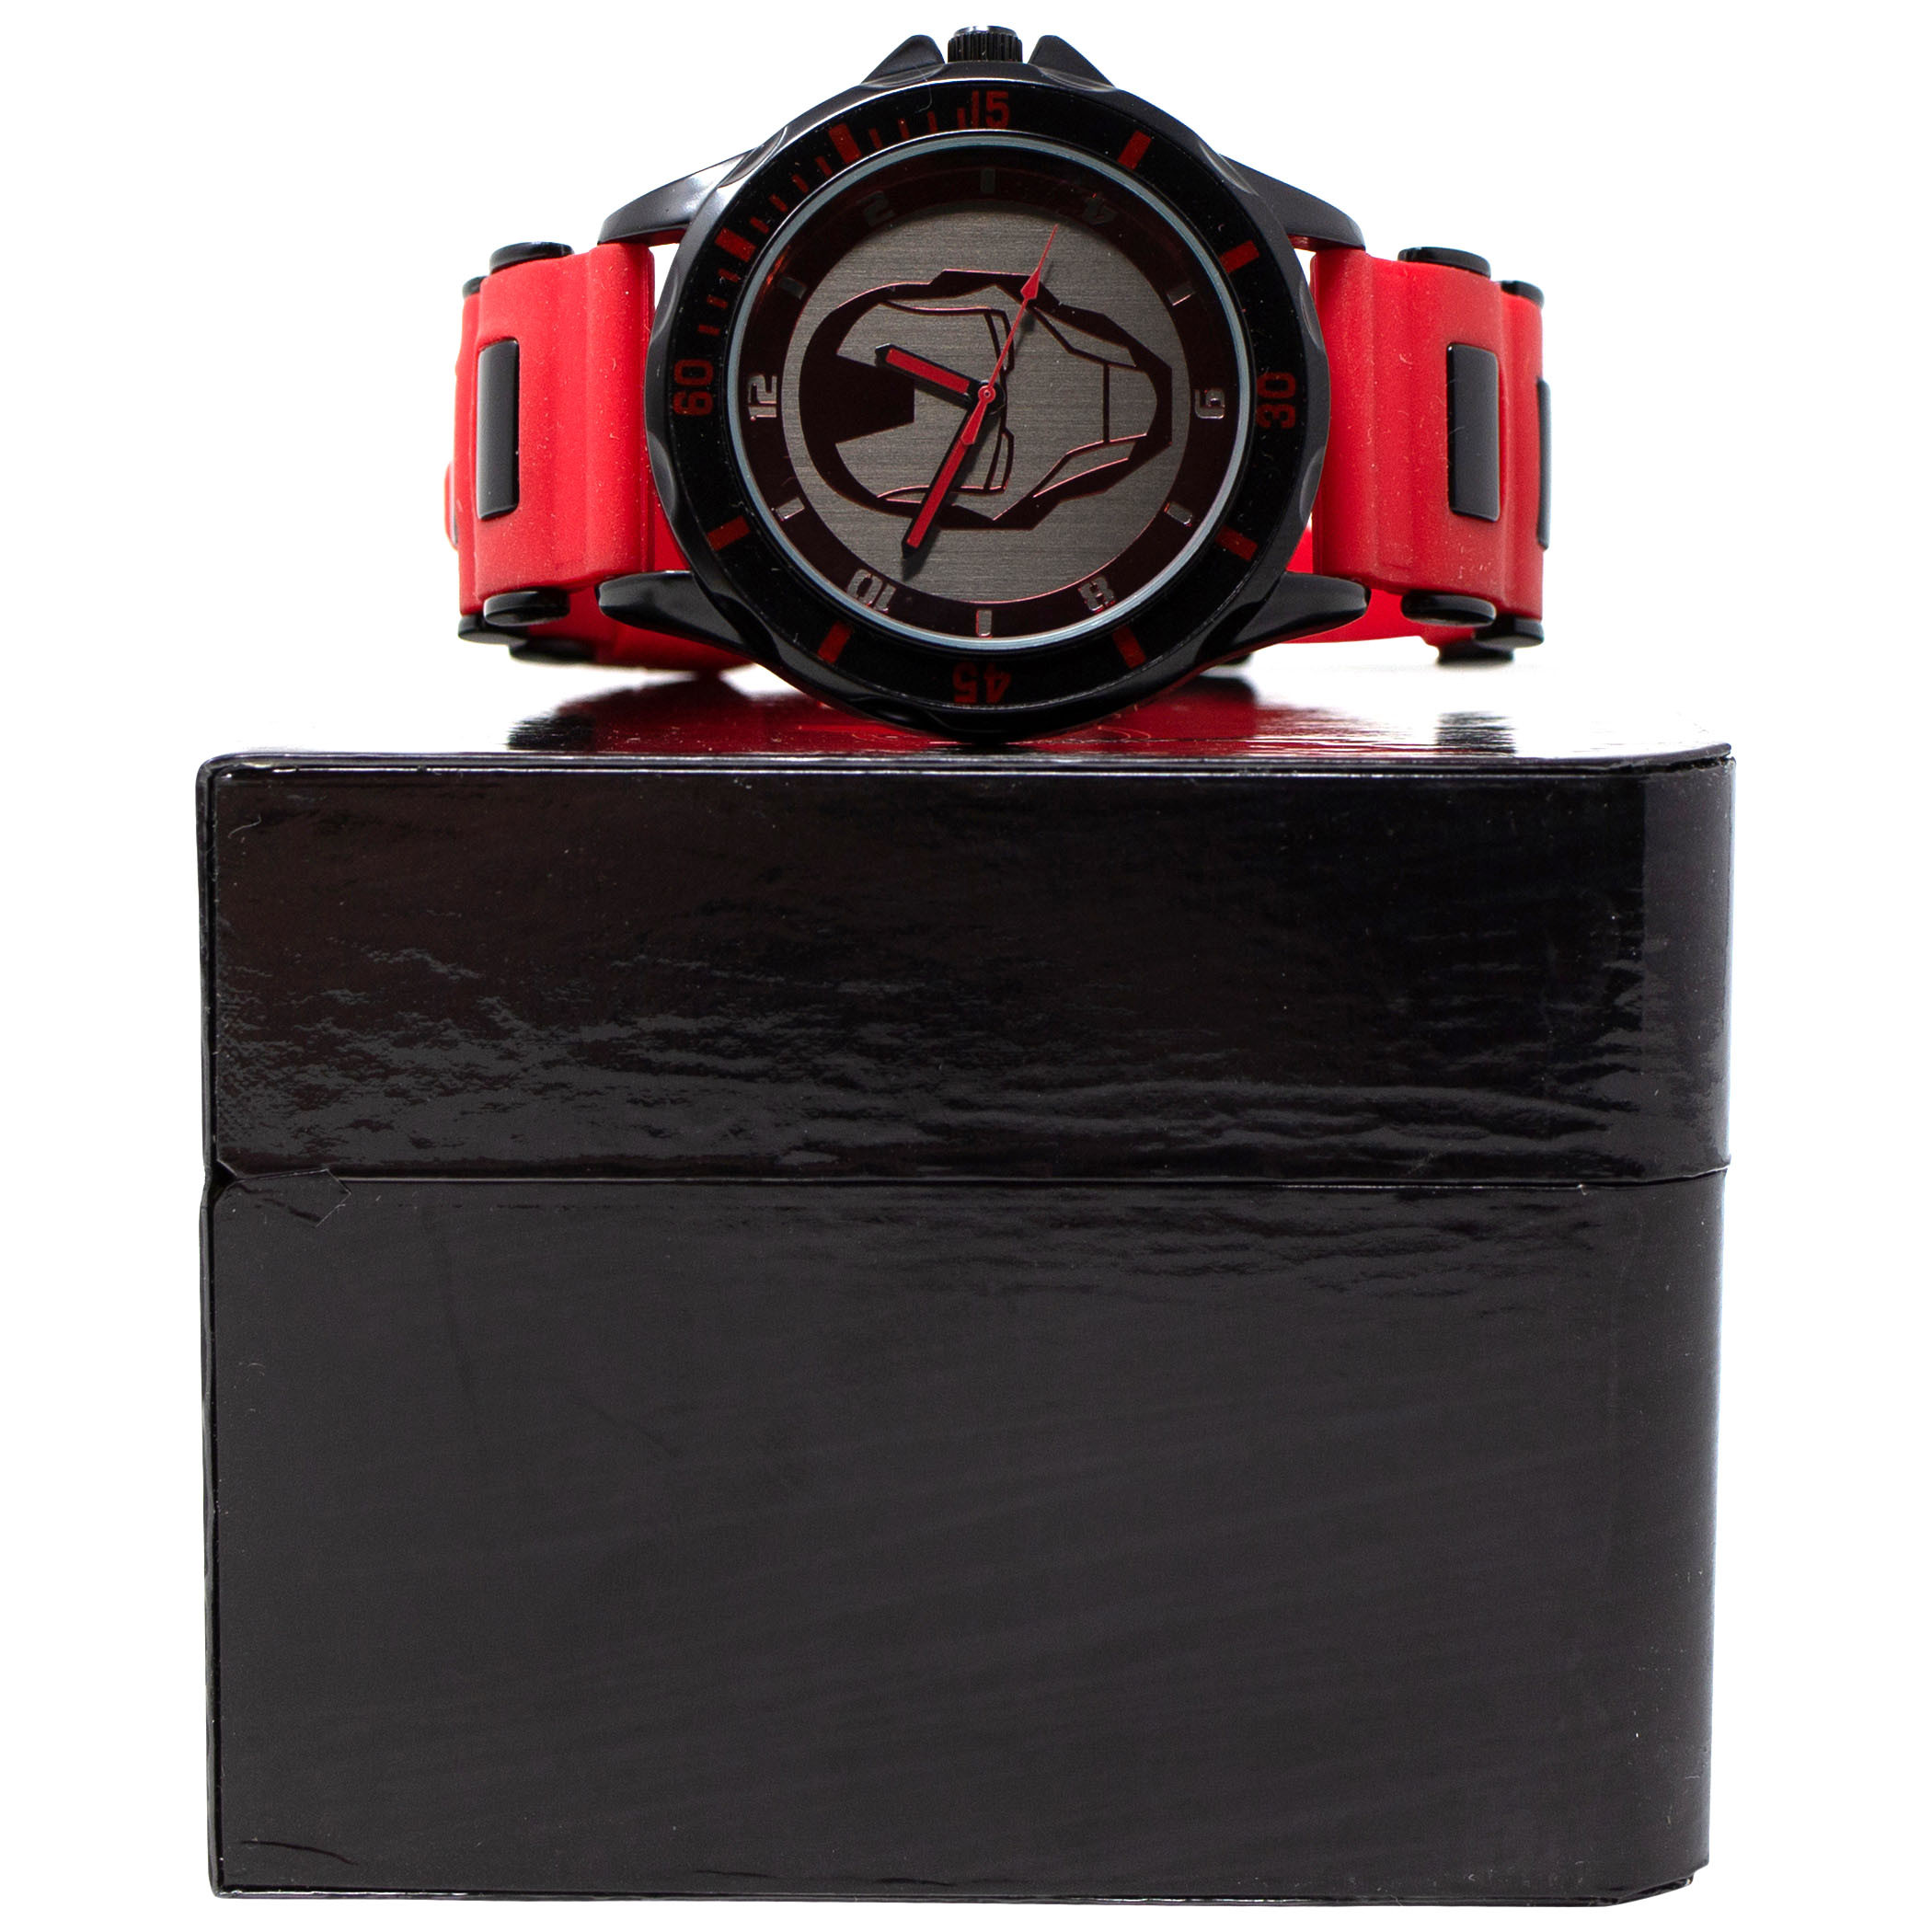 Iron Man Helmet Face Watch with Rubber Wristband